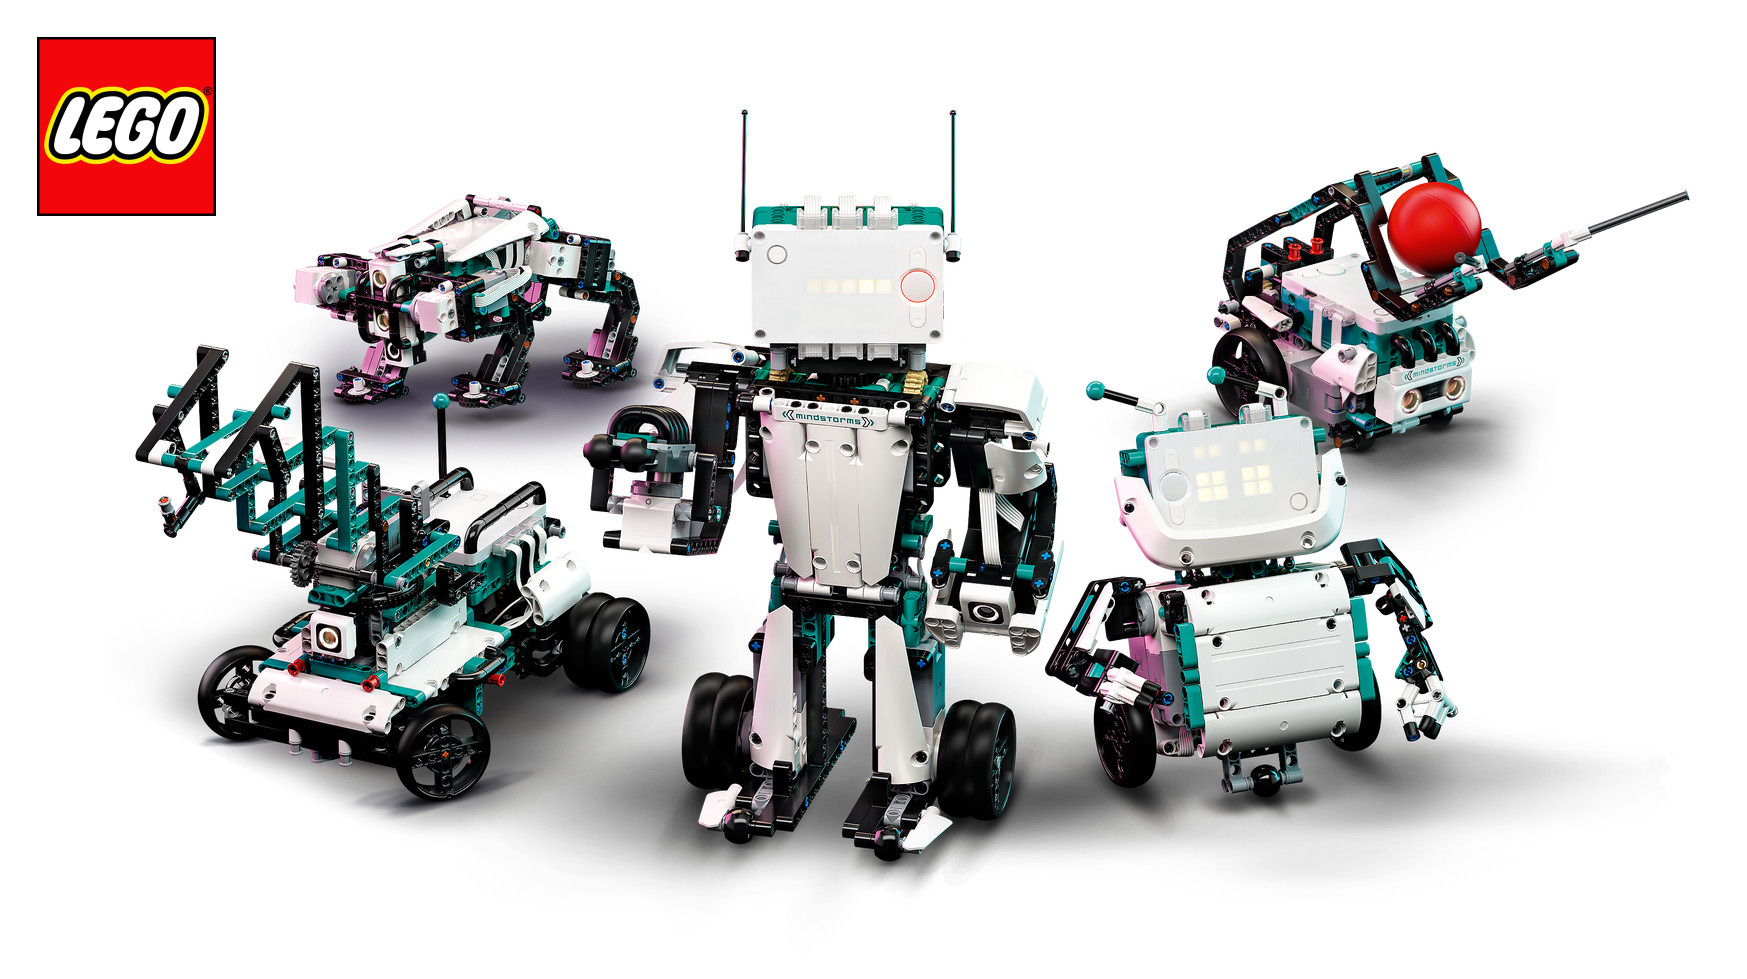 foran nødsituation Fortov Lego to discontinue Mindstorms robot line after a 24-year run | Ars Technica